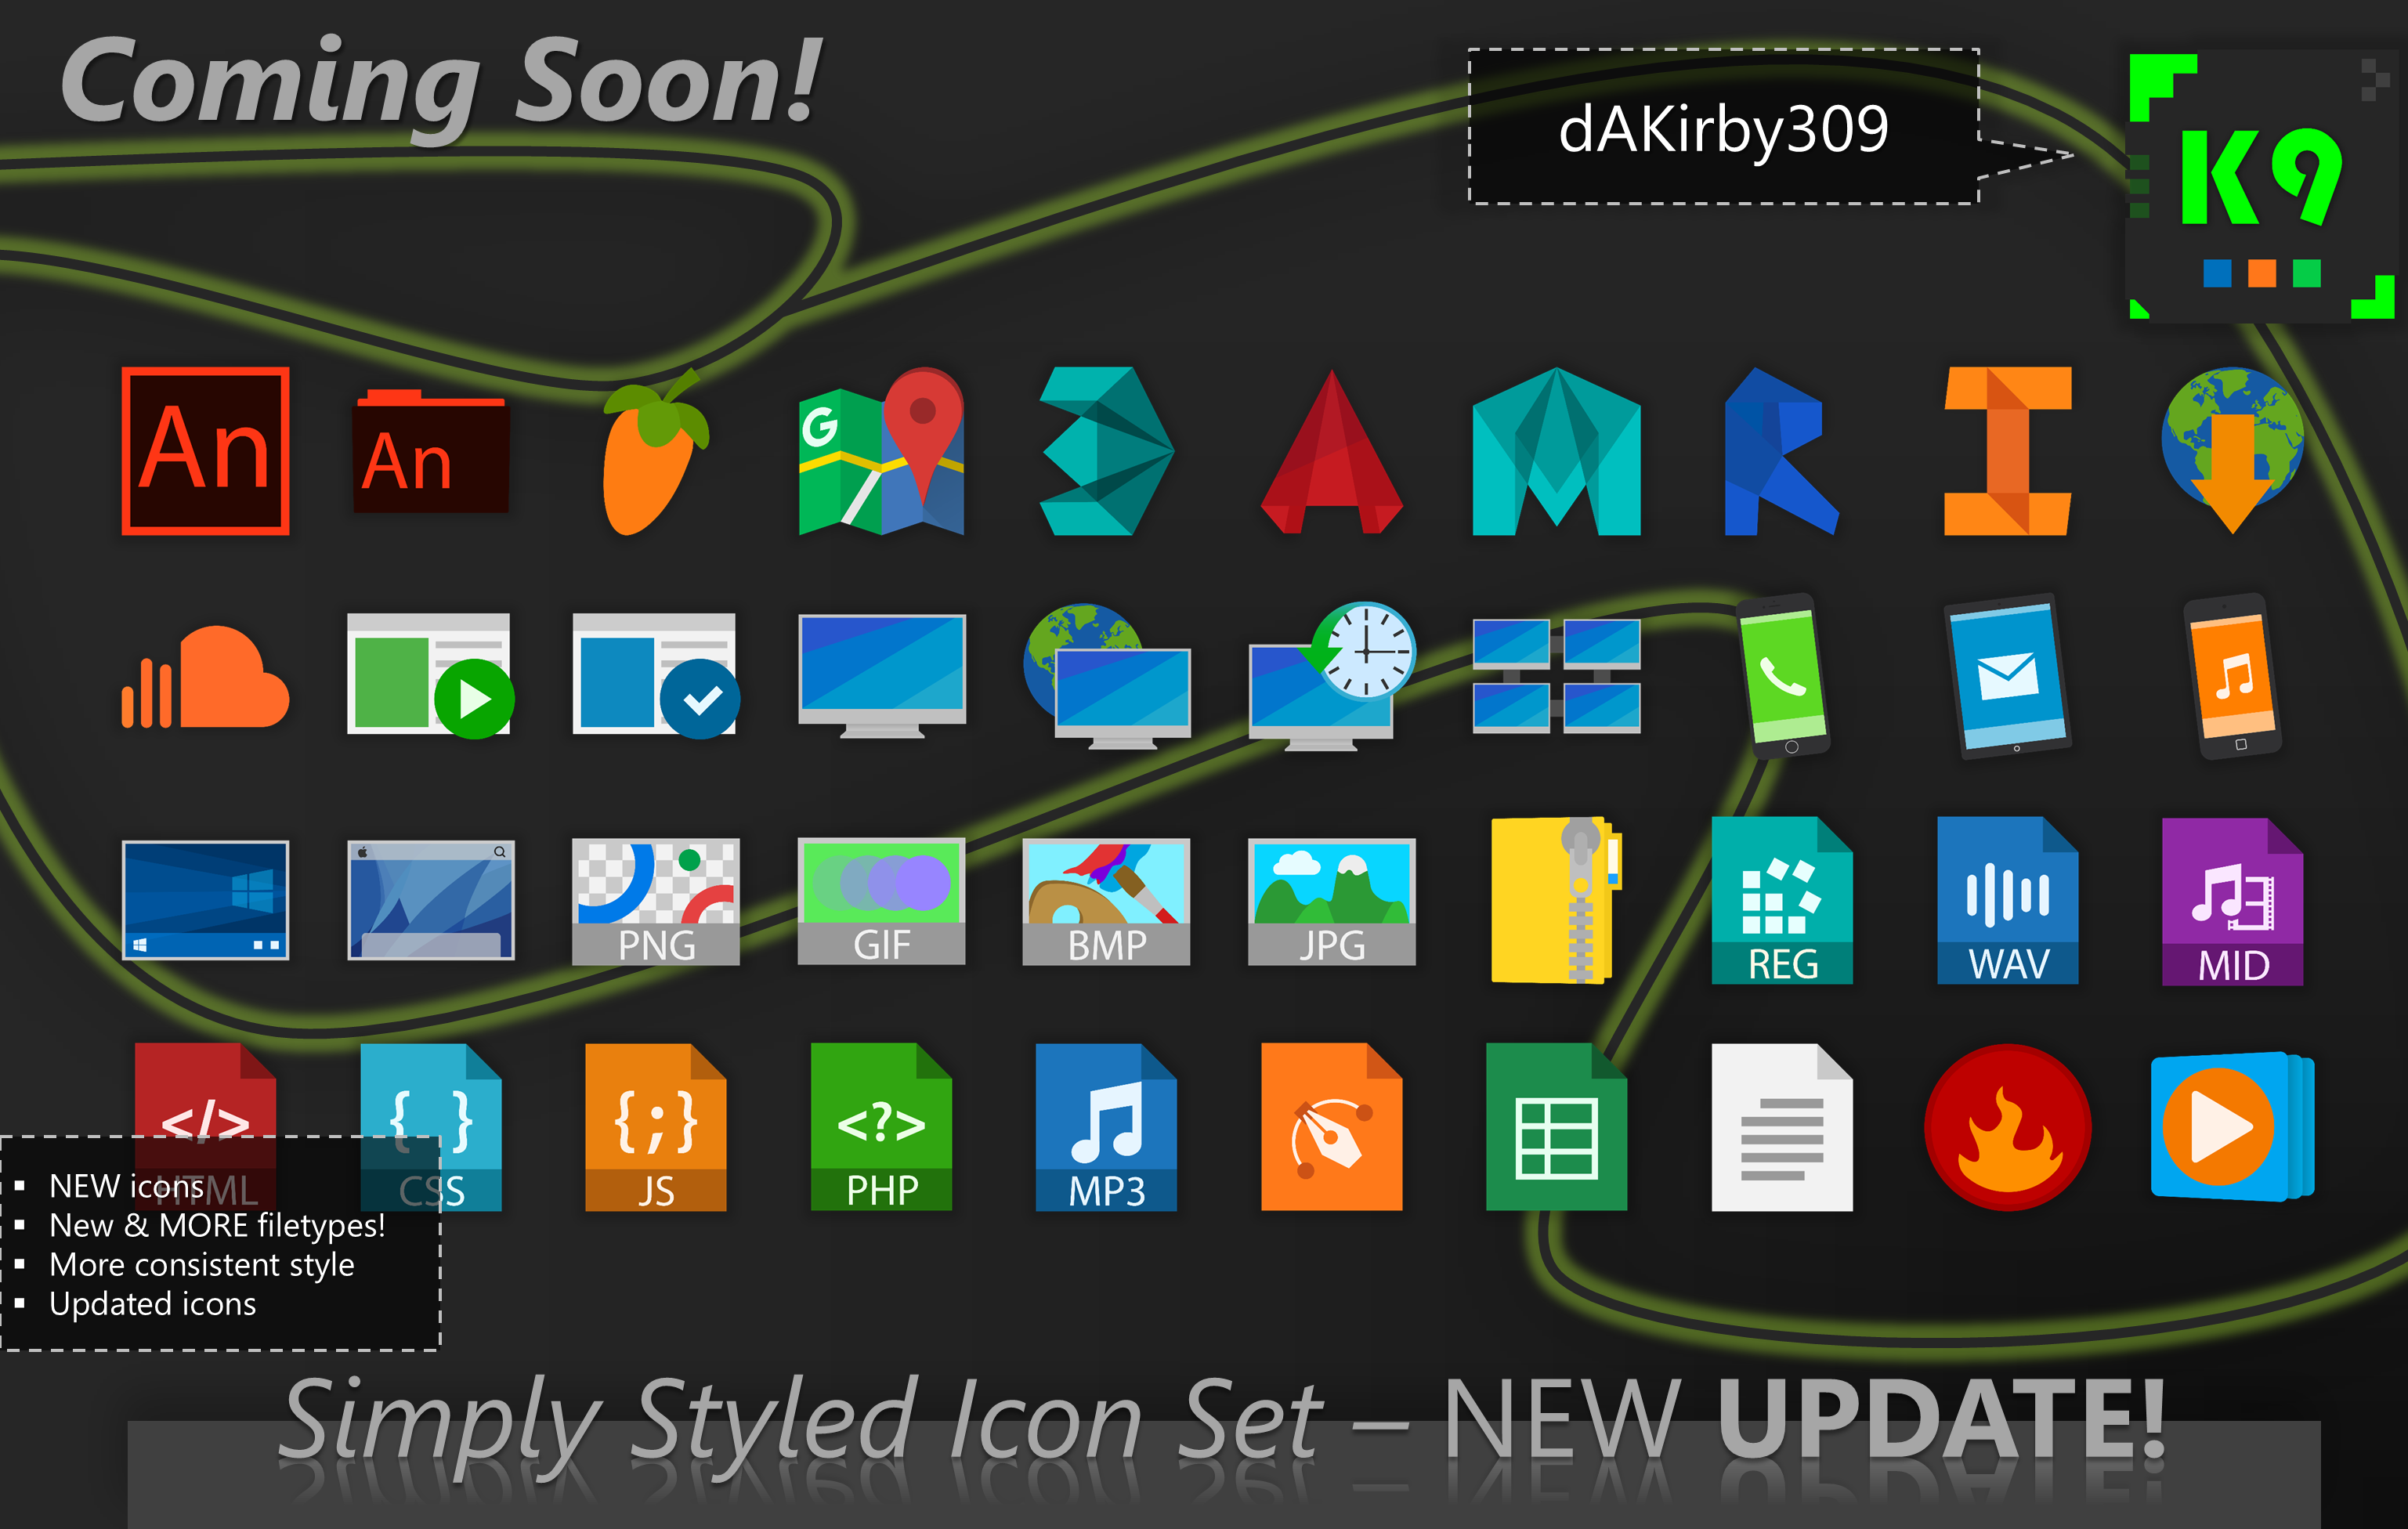 UPDATE PREVIEW #1 - Simply Styled Icon Set